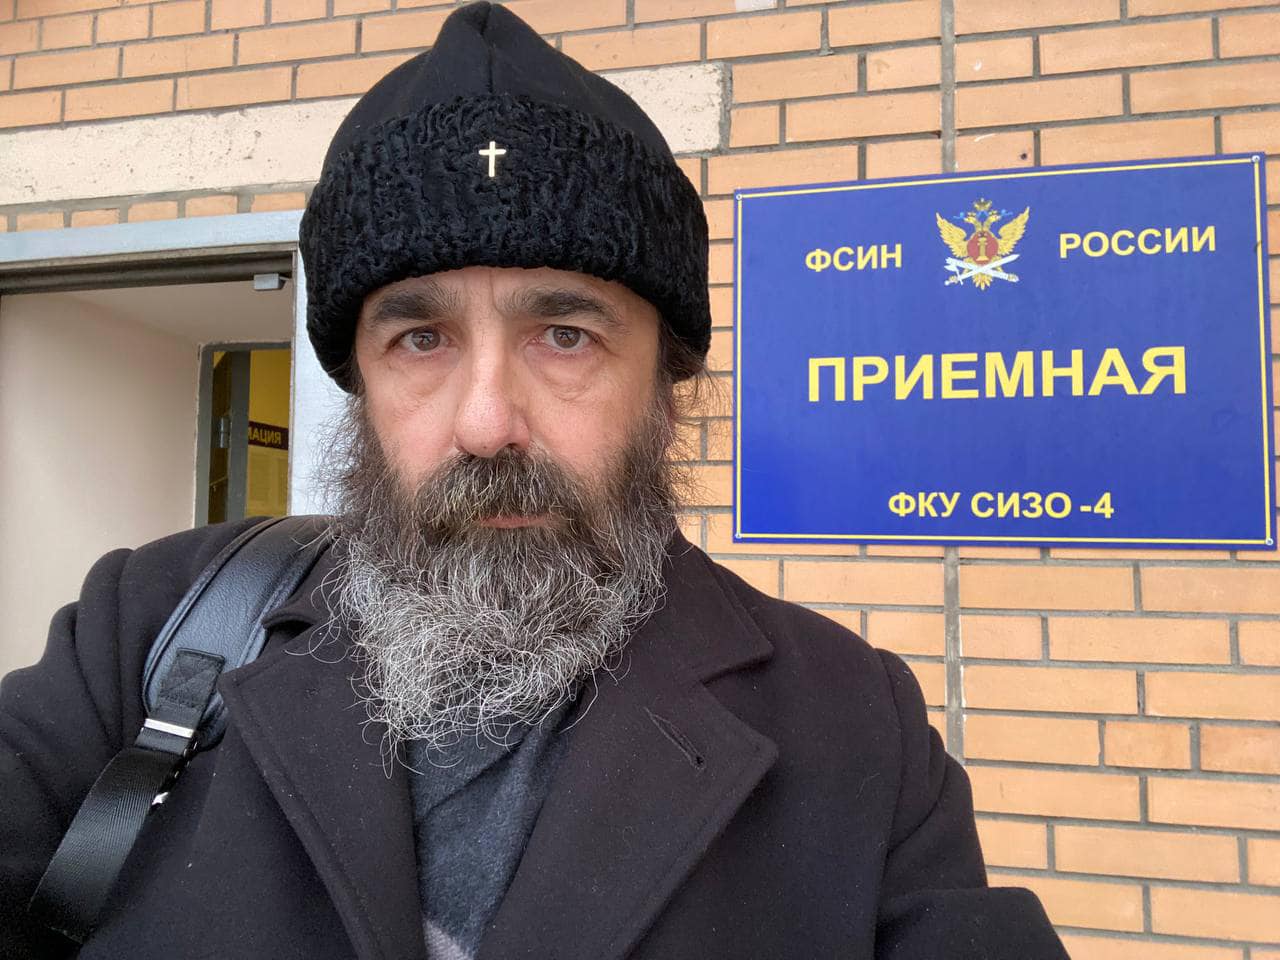 ‘i’m the priest detained on way to navalny memorial – i want freedom for russia’